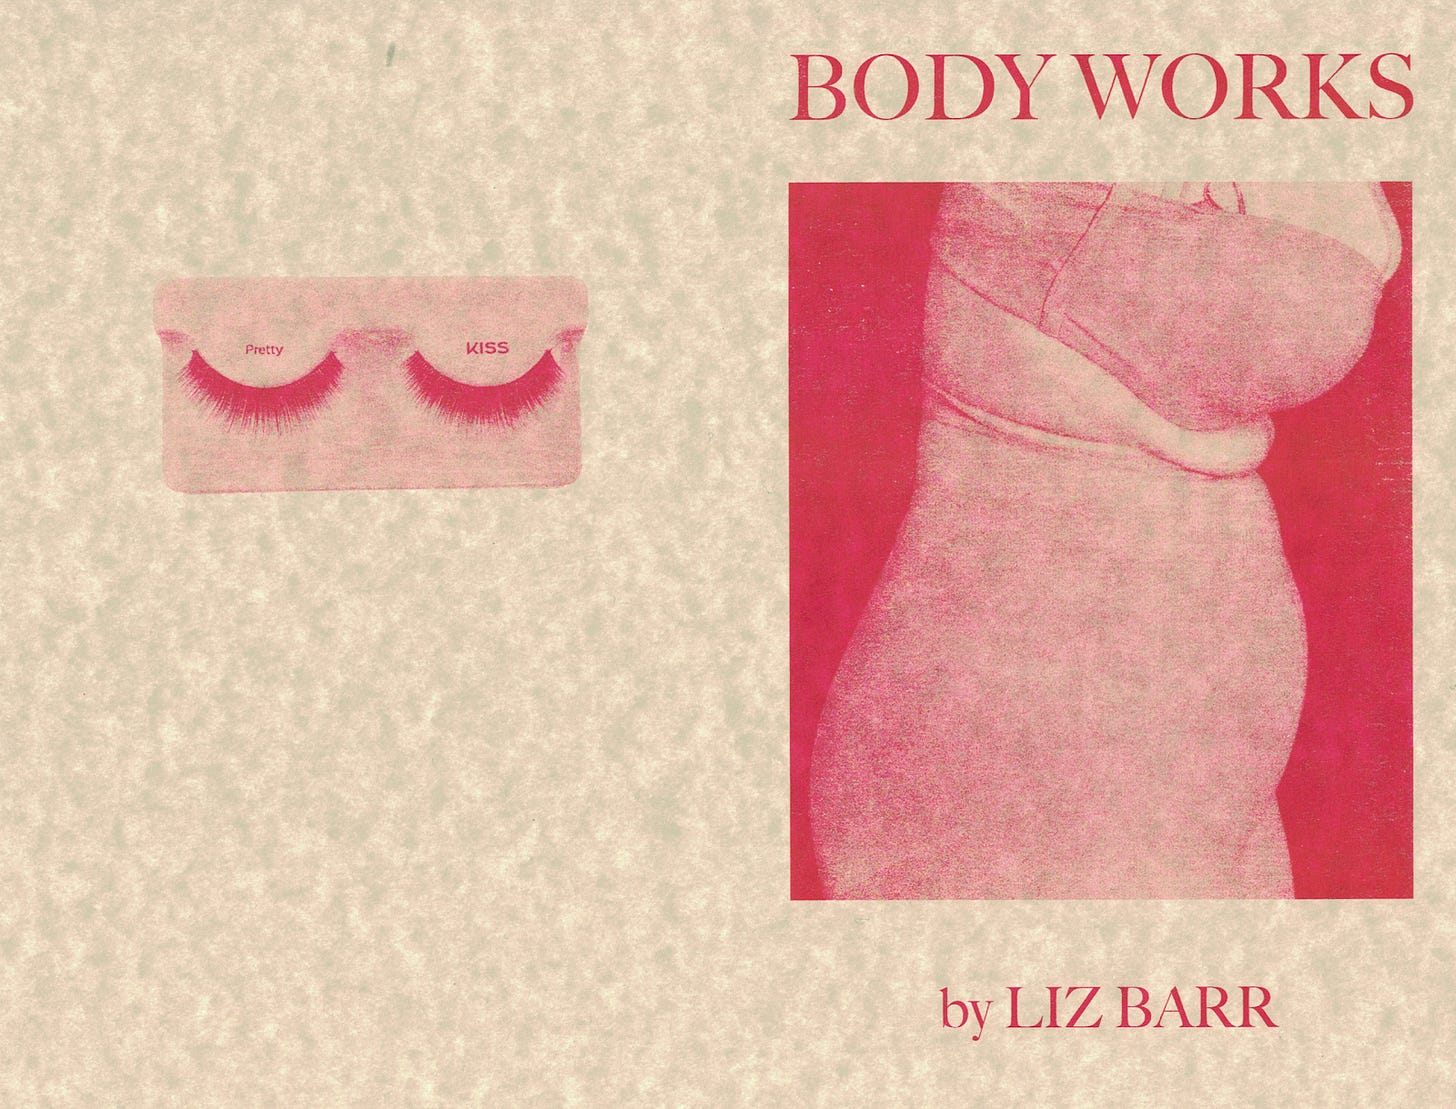 Front and back cover spread of the book, “Body Works” displaying red toned images on a beige background of a a case of false eyelashes and a cropped torso wearing spandex and a bra. On top of each eyelash reads the text “Pretty and “KISS”.